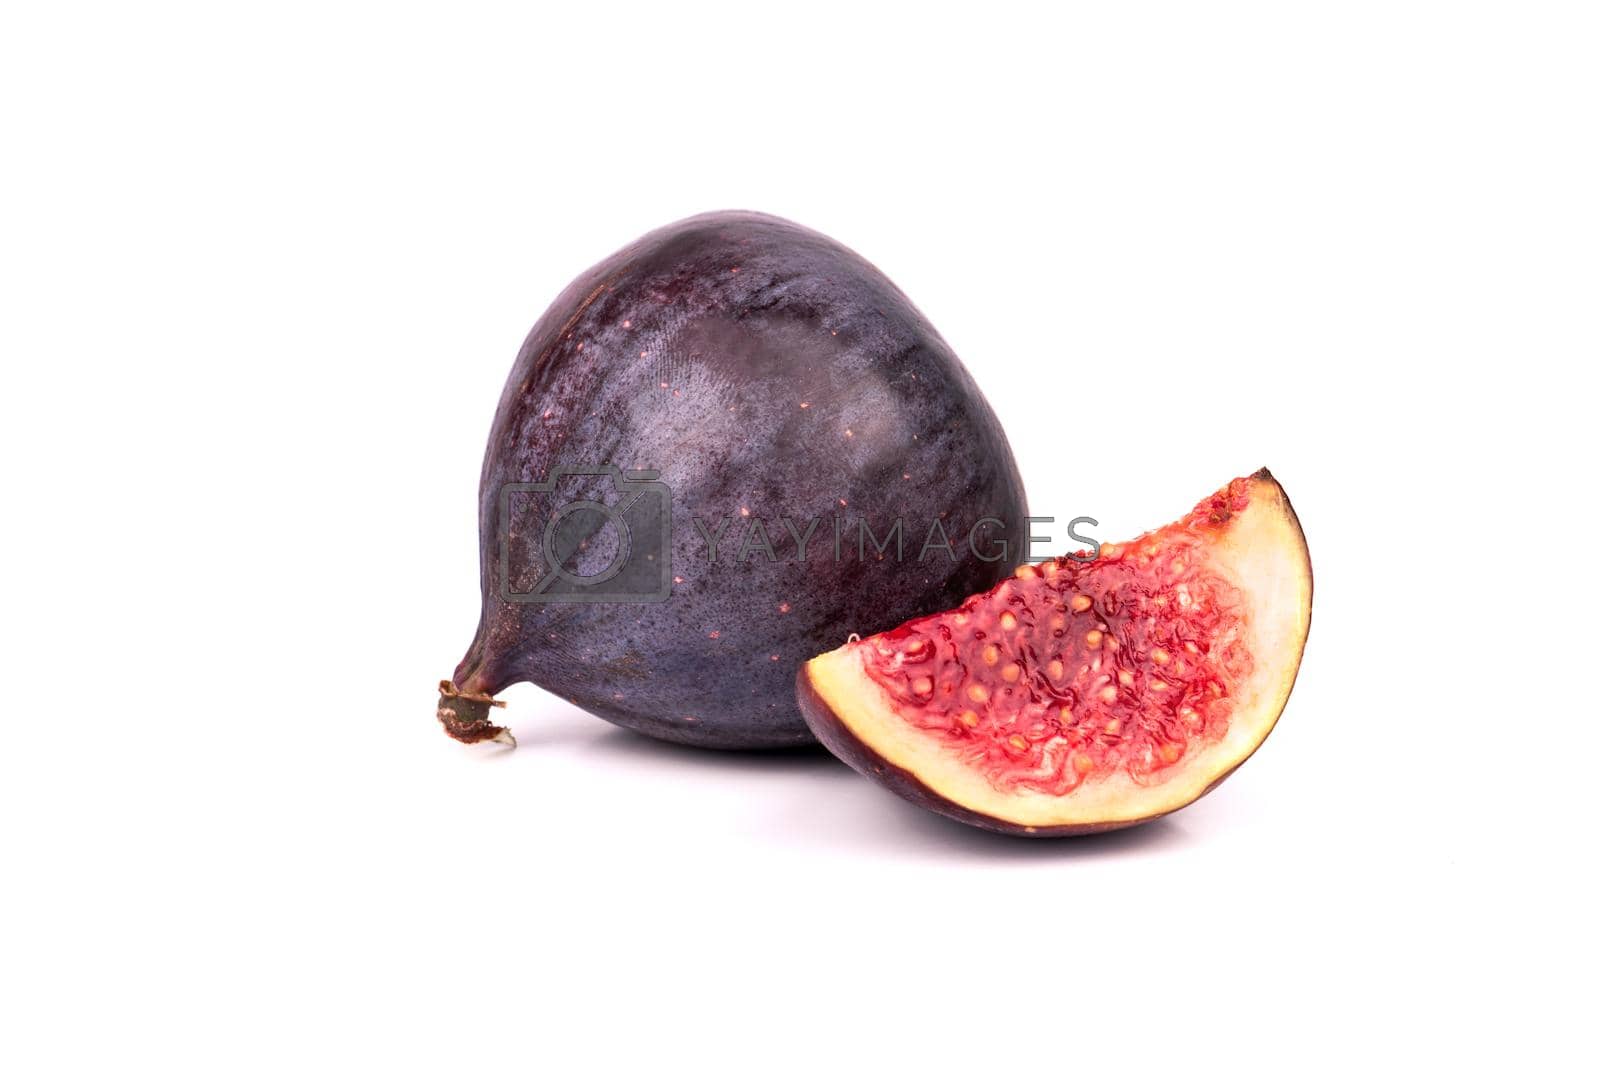 Royalty free image of Fresh figs by andregric